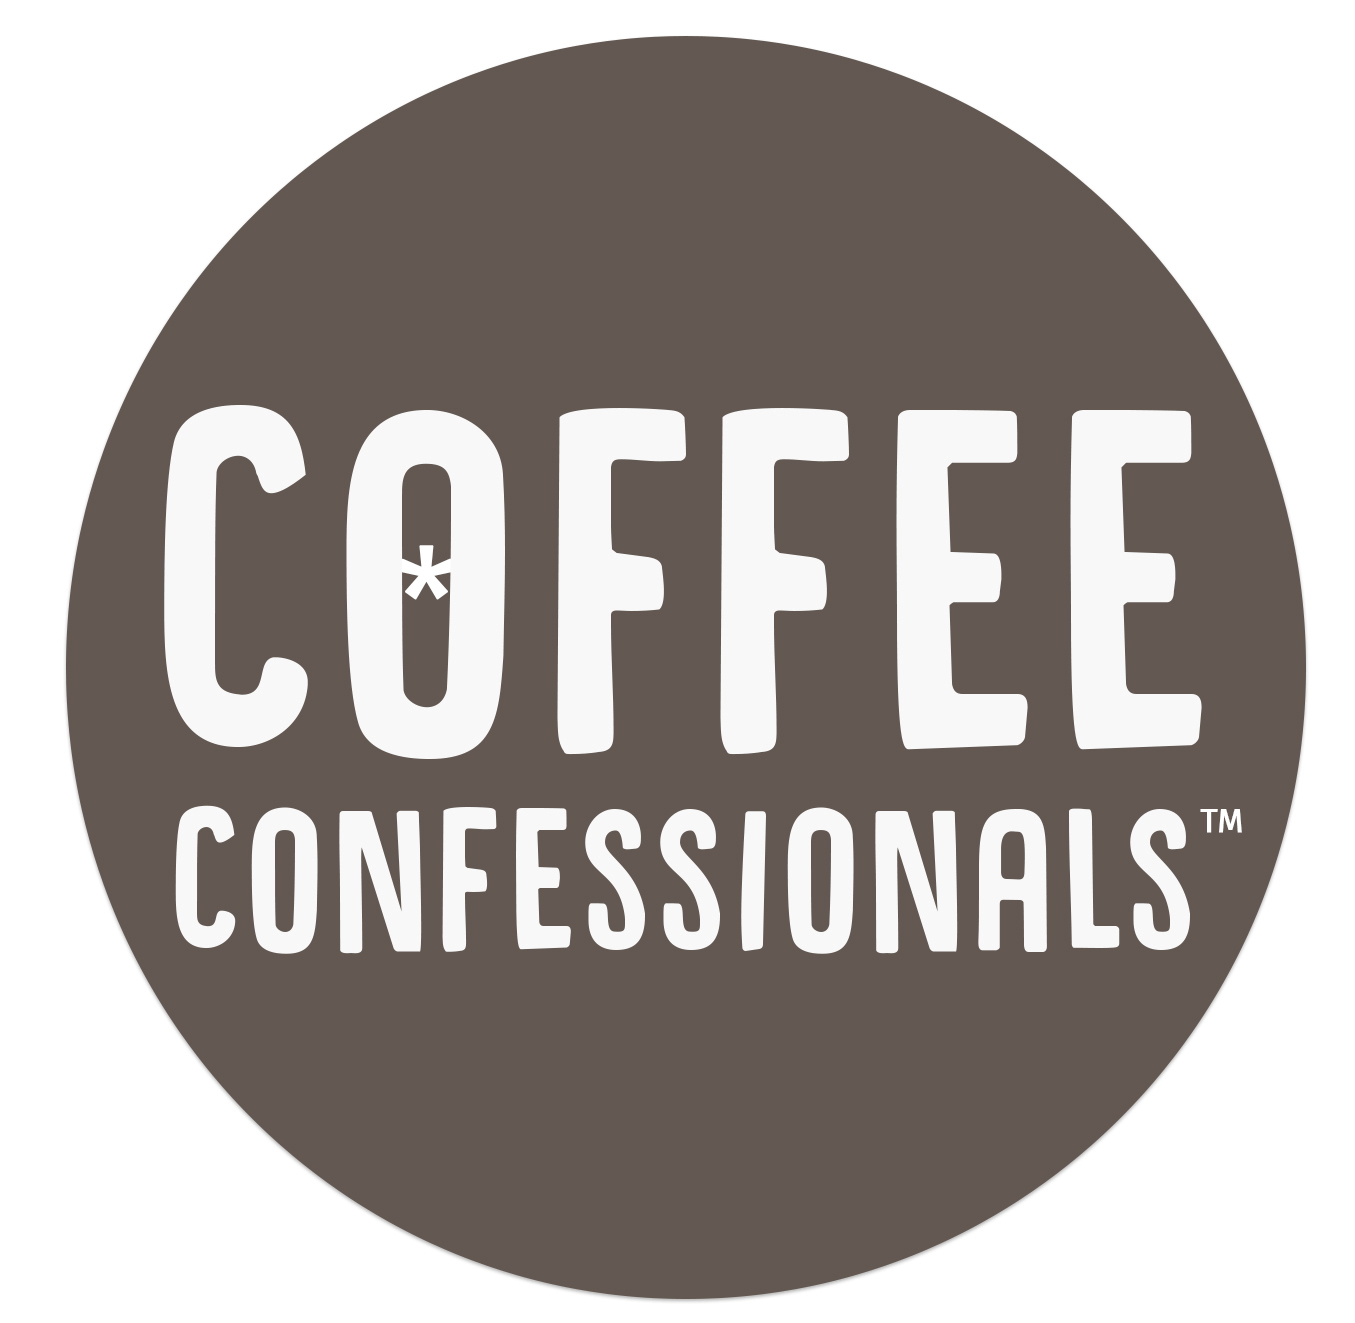 Coffee Confessionals